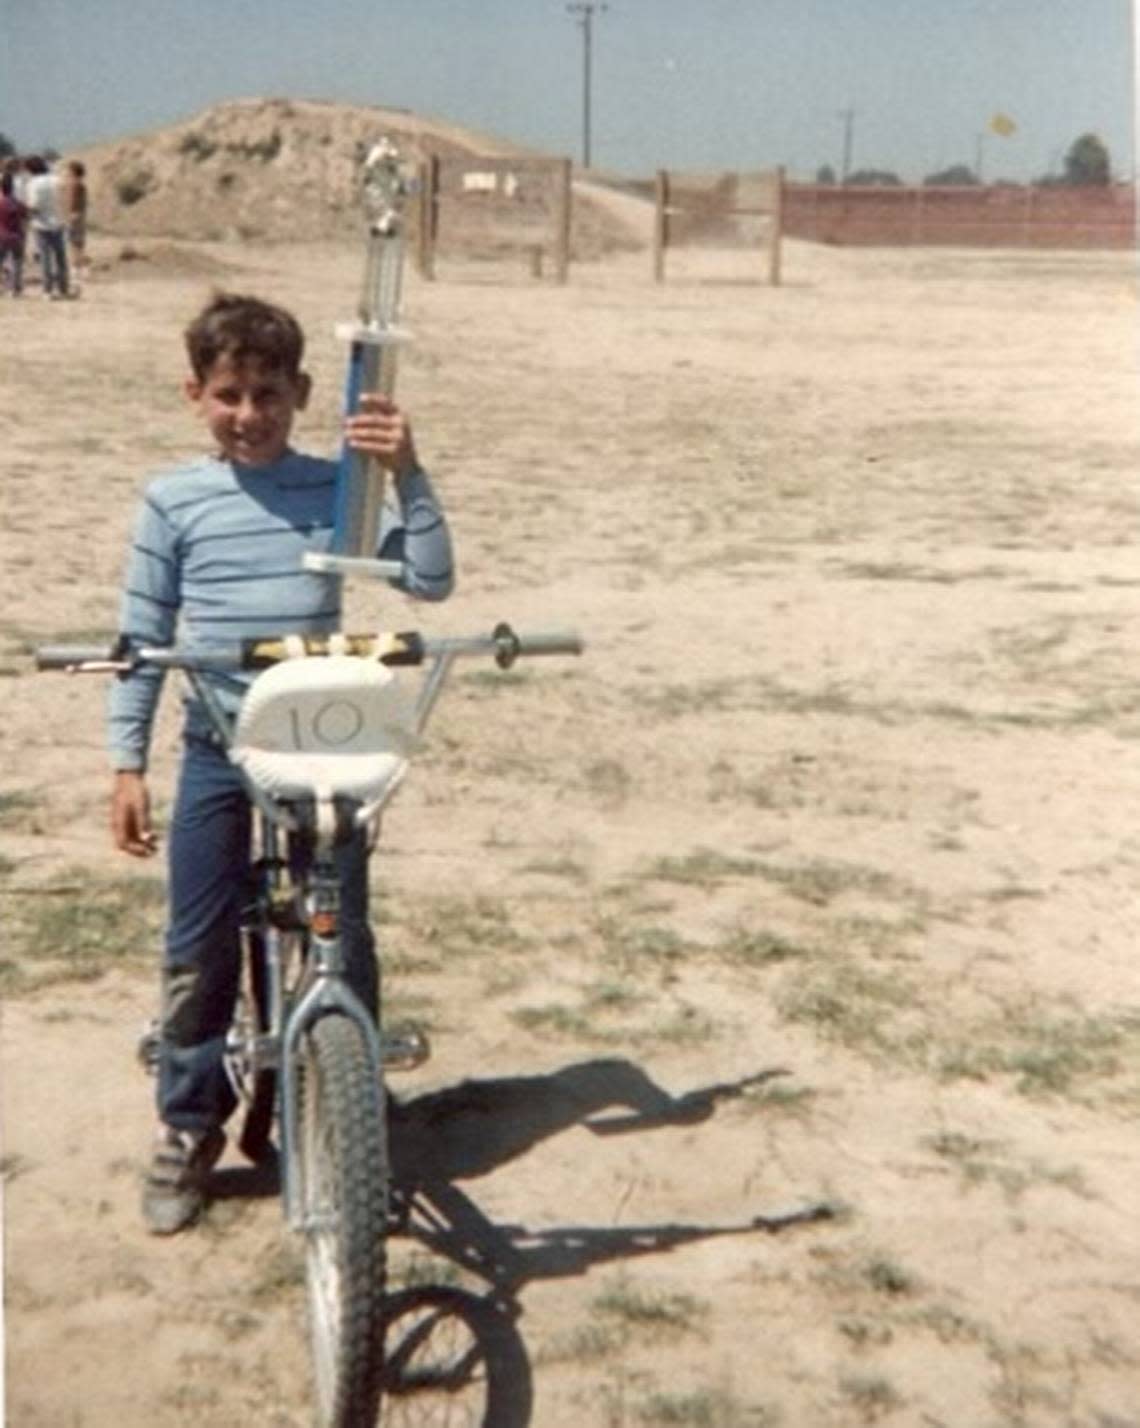 Randy Stumpfhauser after his first race in Sanger in 1986. The BMX rider is being inducted into the BMX Hall of Fame for 2022. Stumpfhauser family